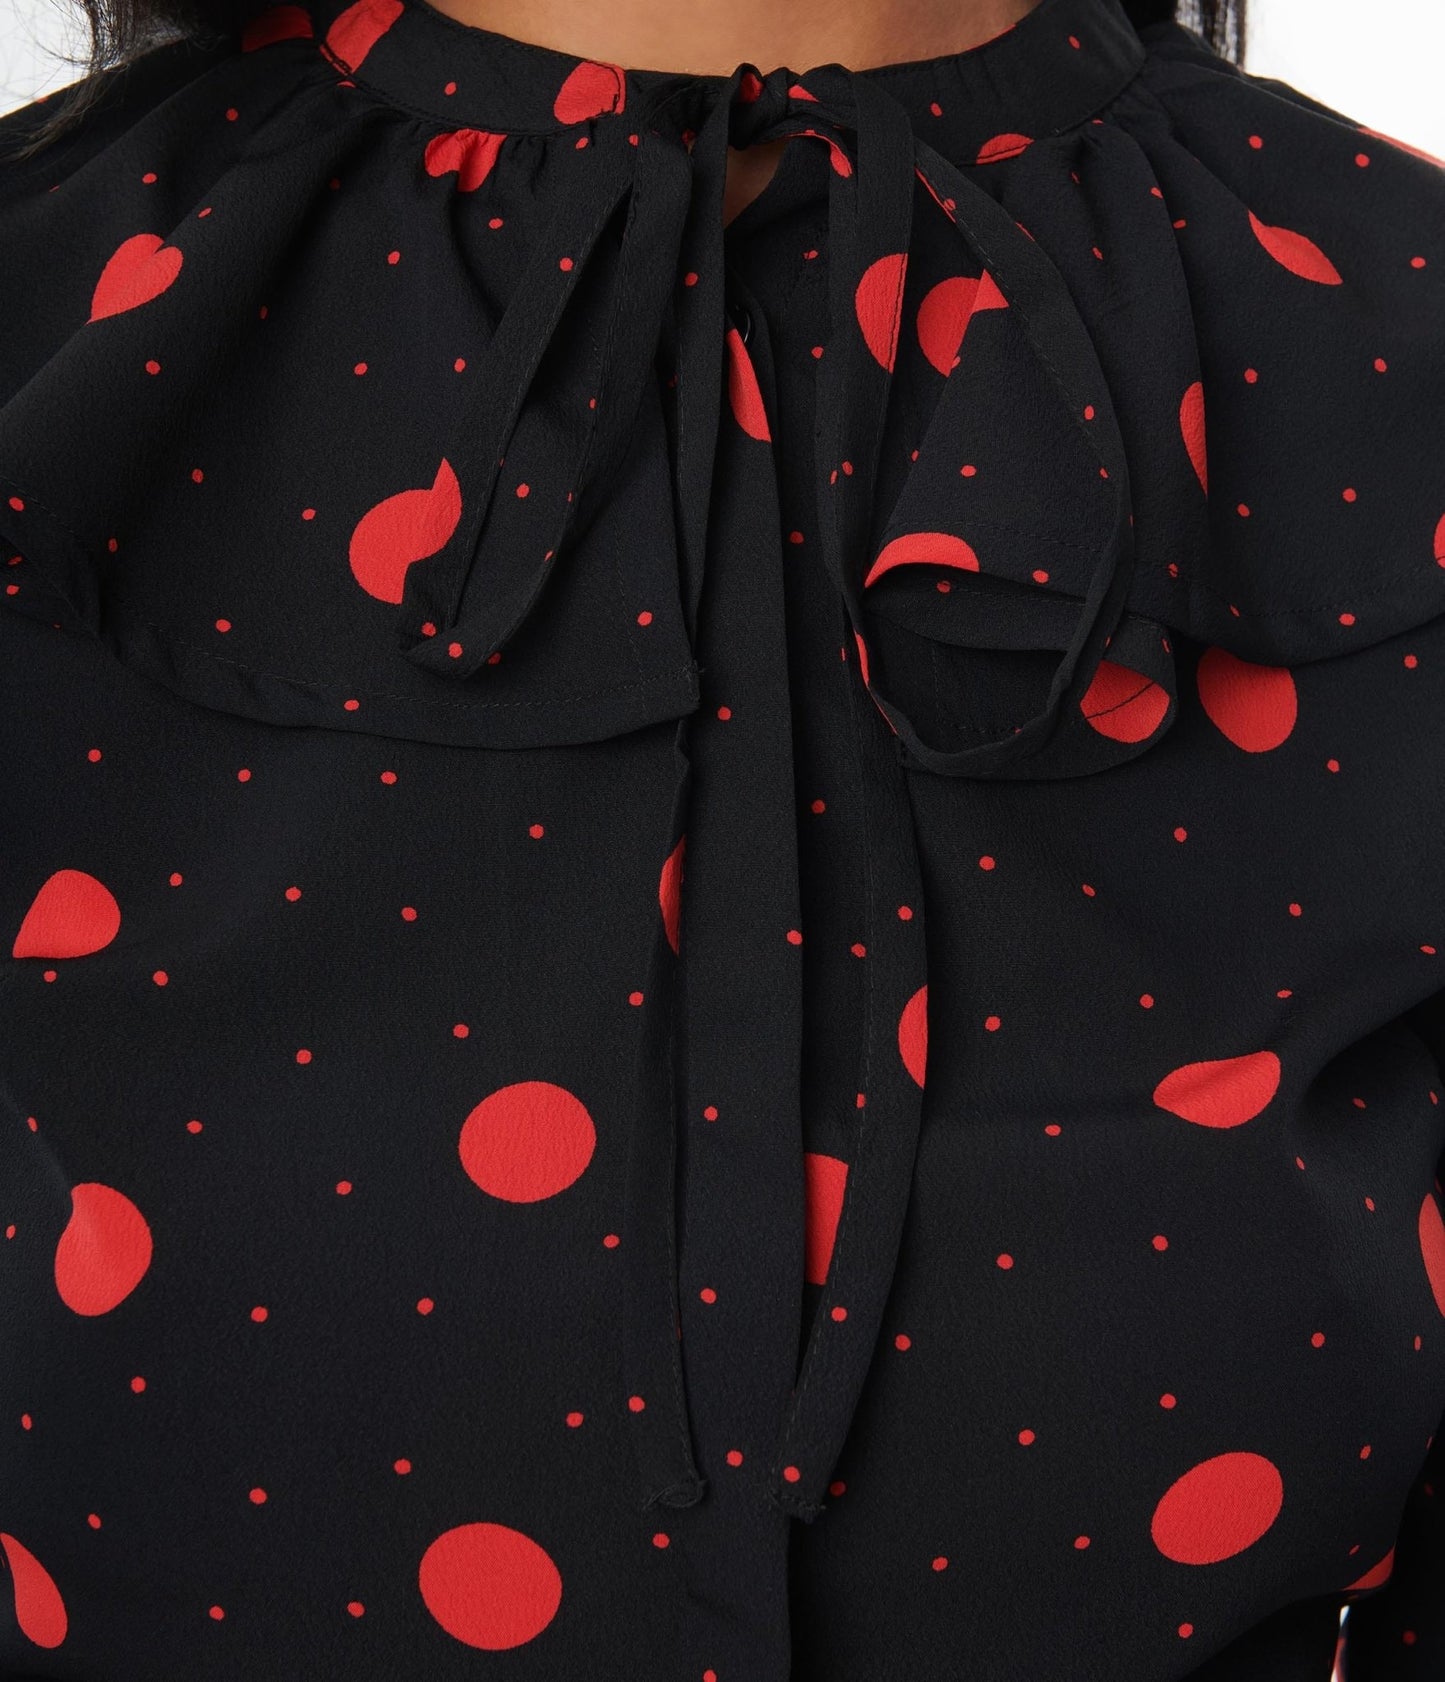 Black & Red Polka Dot Ruffle Collared Blouse - Unique Vintage - Womens, TOPS, WOVEN TOPS